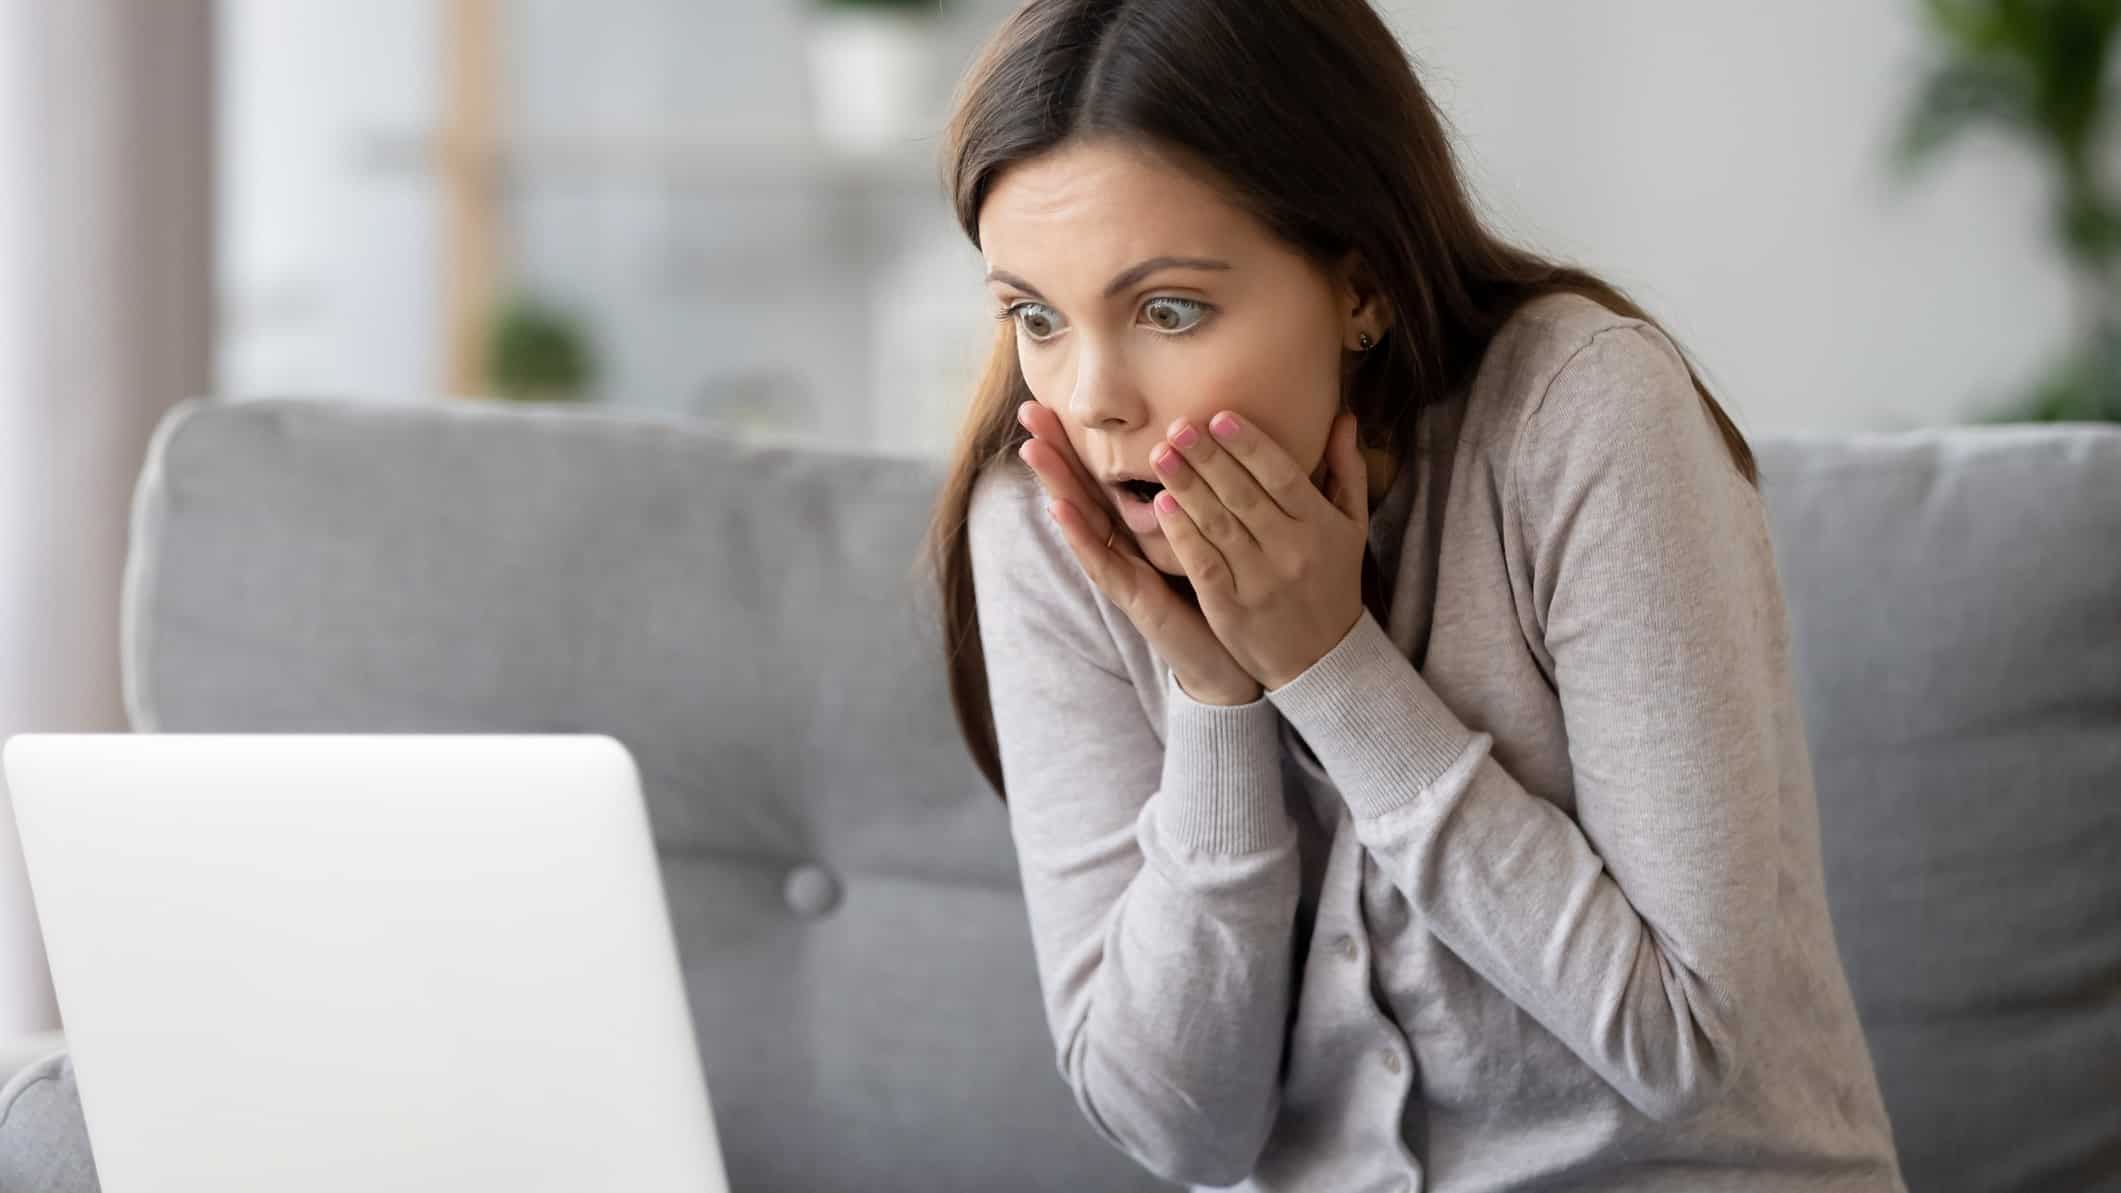 A woman holds her hands to the side of her face as she sits back in shock at something she is reading or seeing on her computer screen.